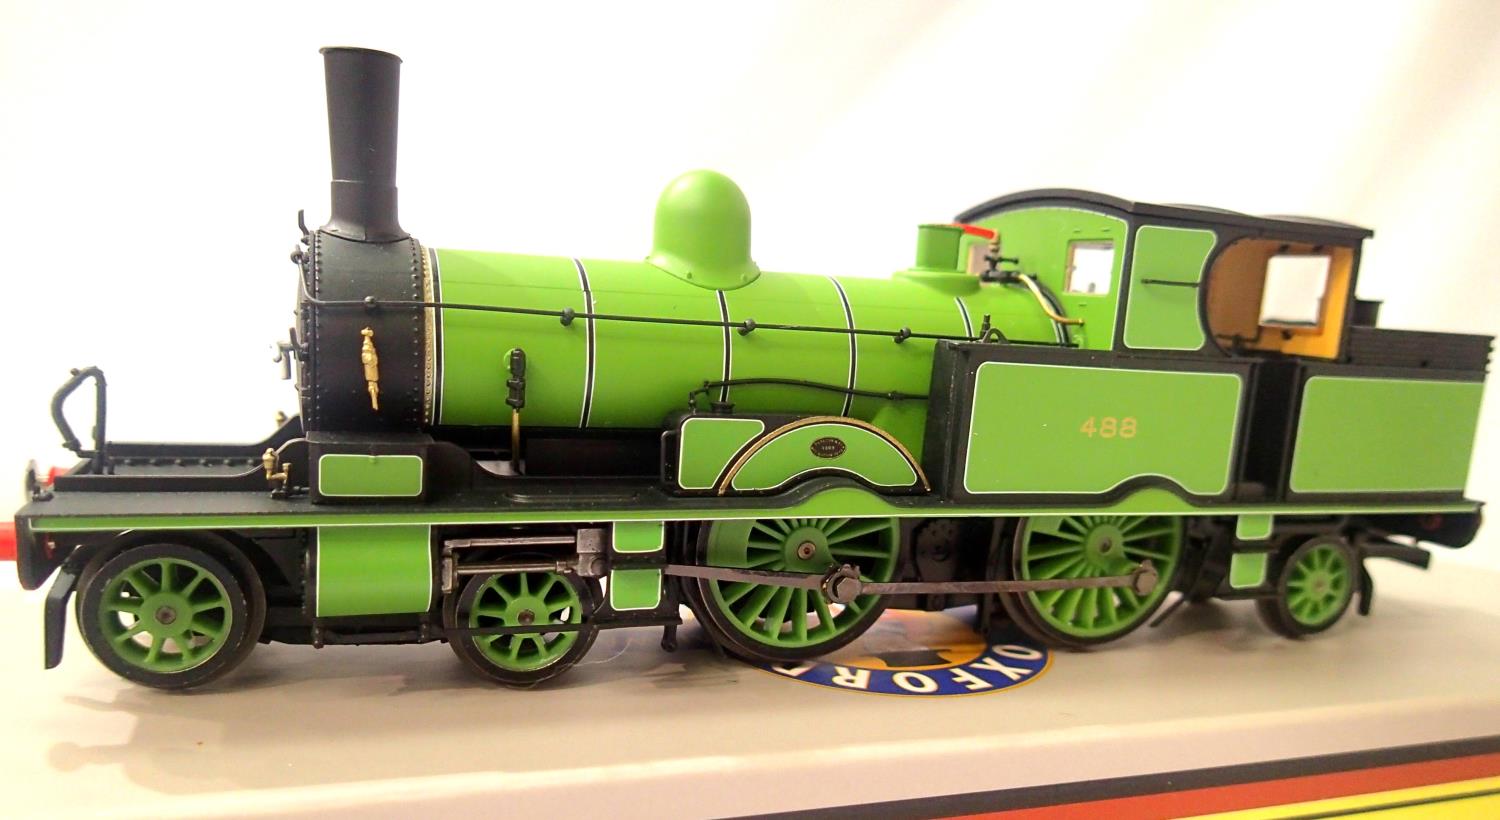 Oxford Rail OR76 AR003, Adams Radial tank, Southern Green, 488 in very near mint condition, boxed.